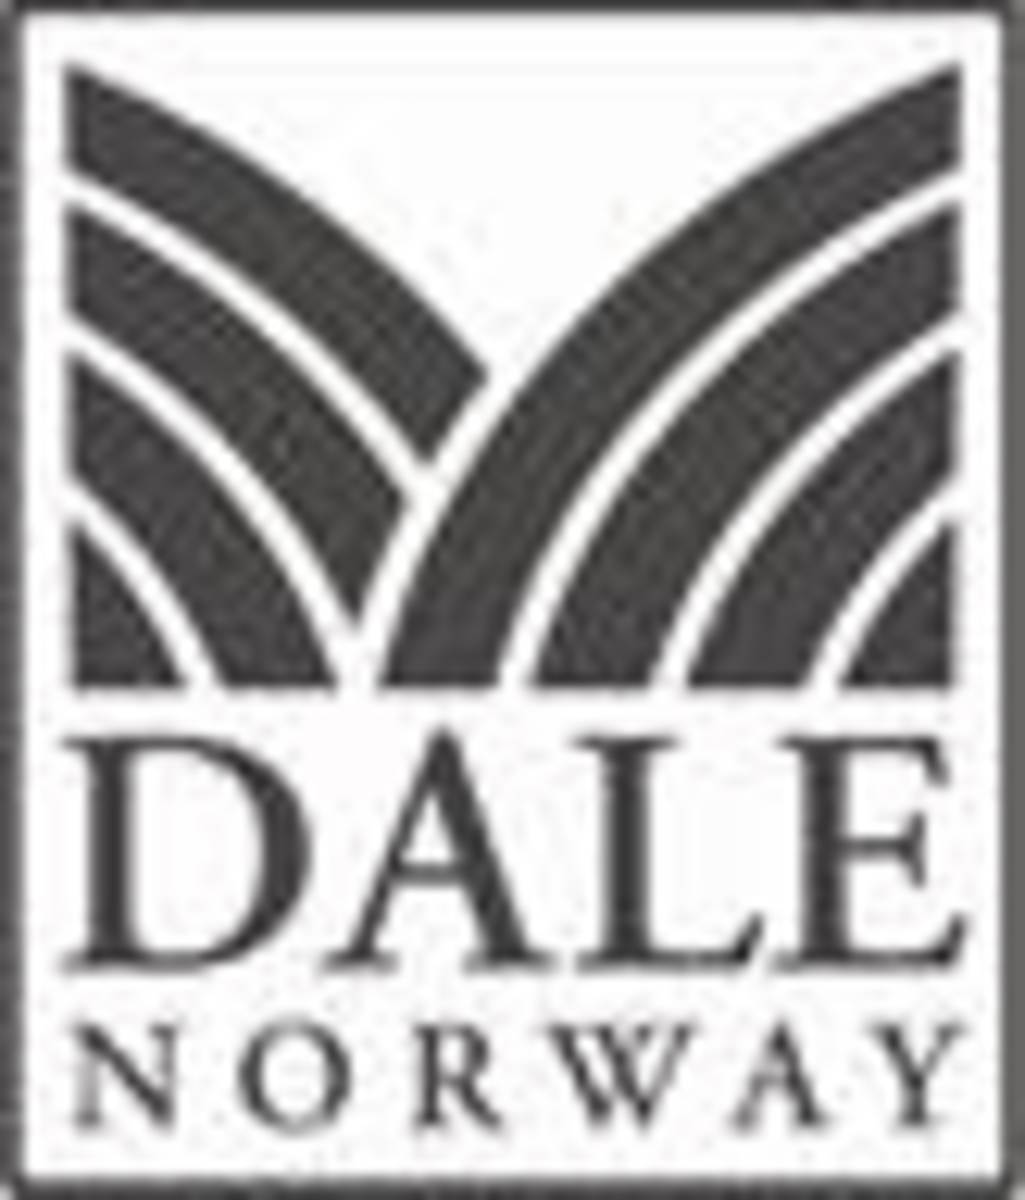 Dale Logo - Dale of Norway is the Official Sweater Brand of Ski Vermont